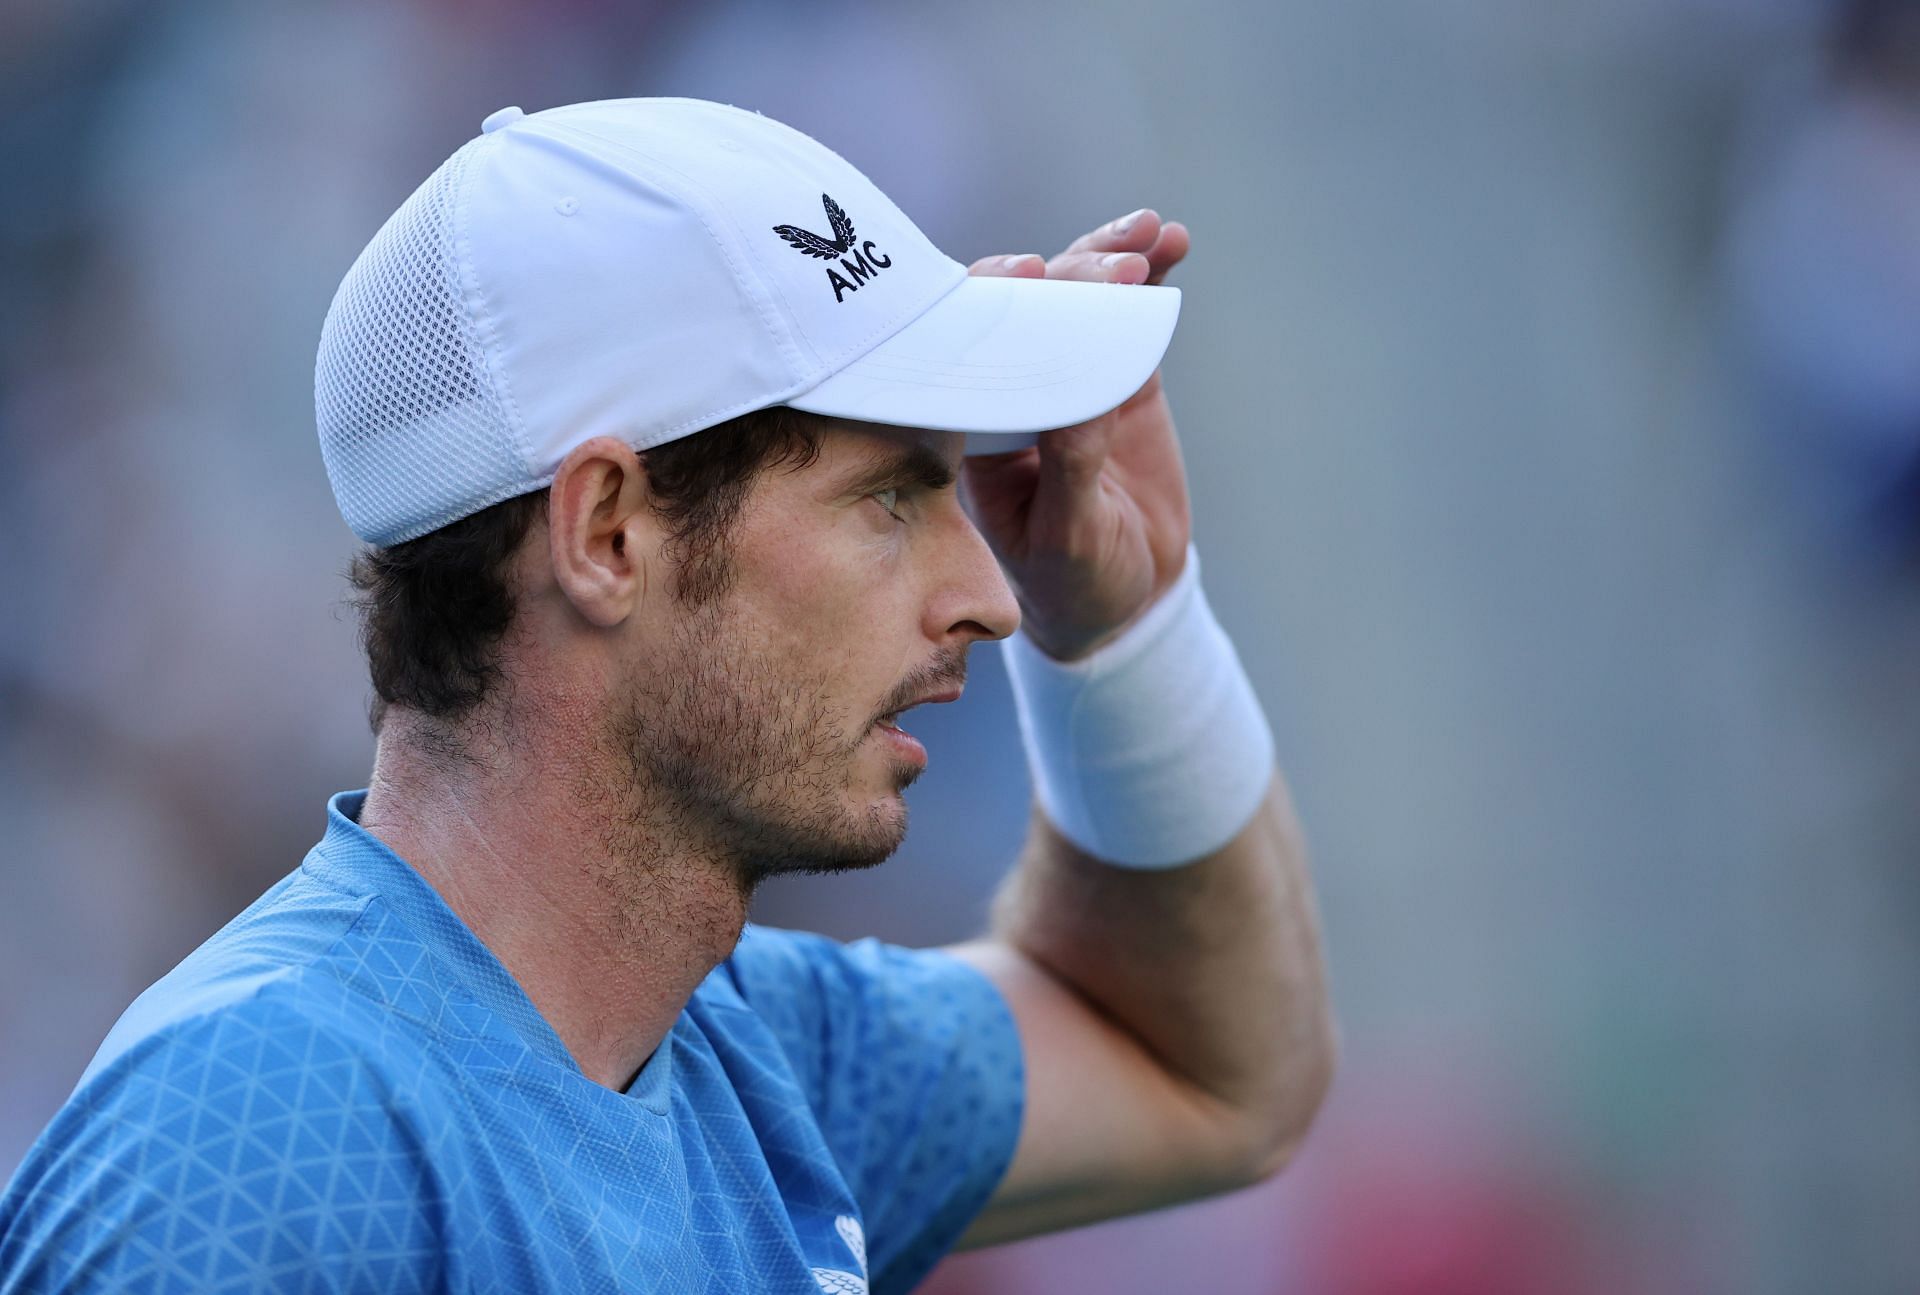 Andy Murray at the Indian Wells Masters 2021